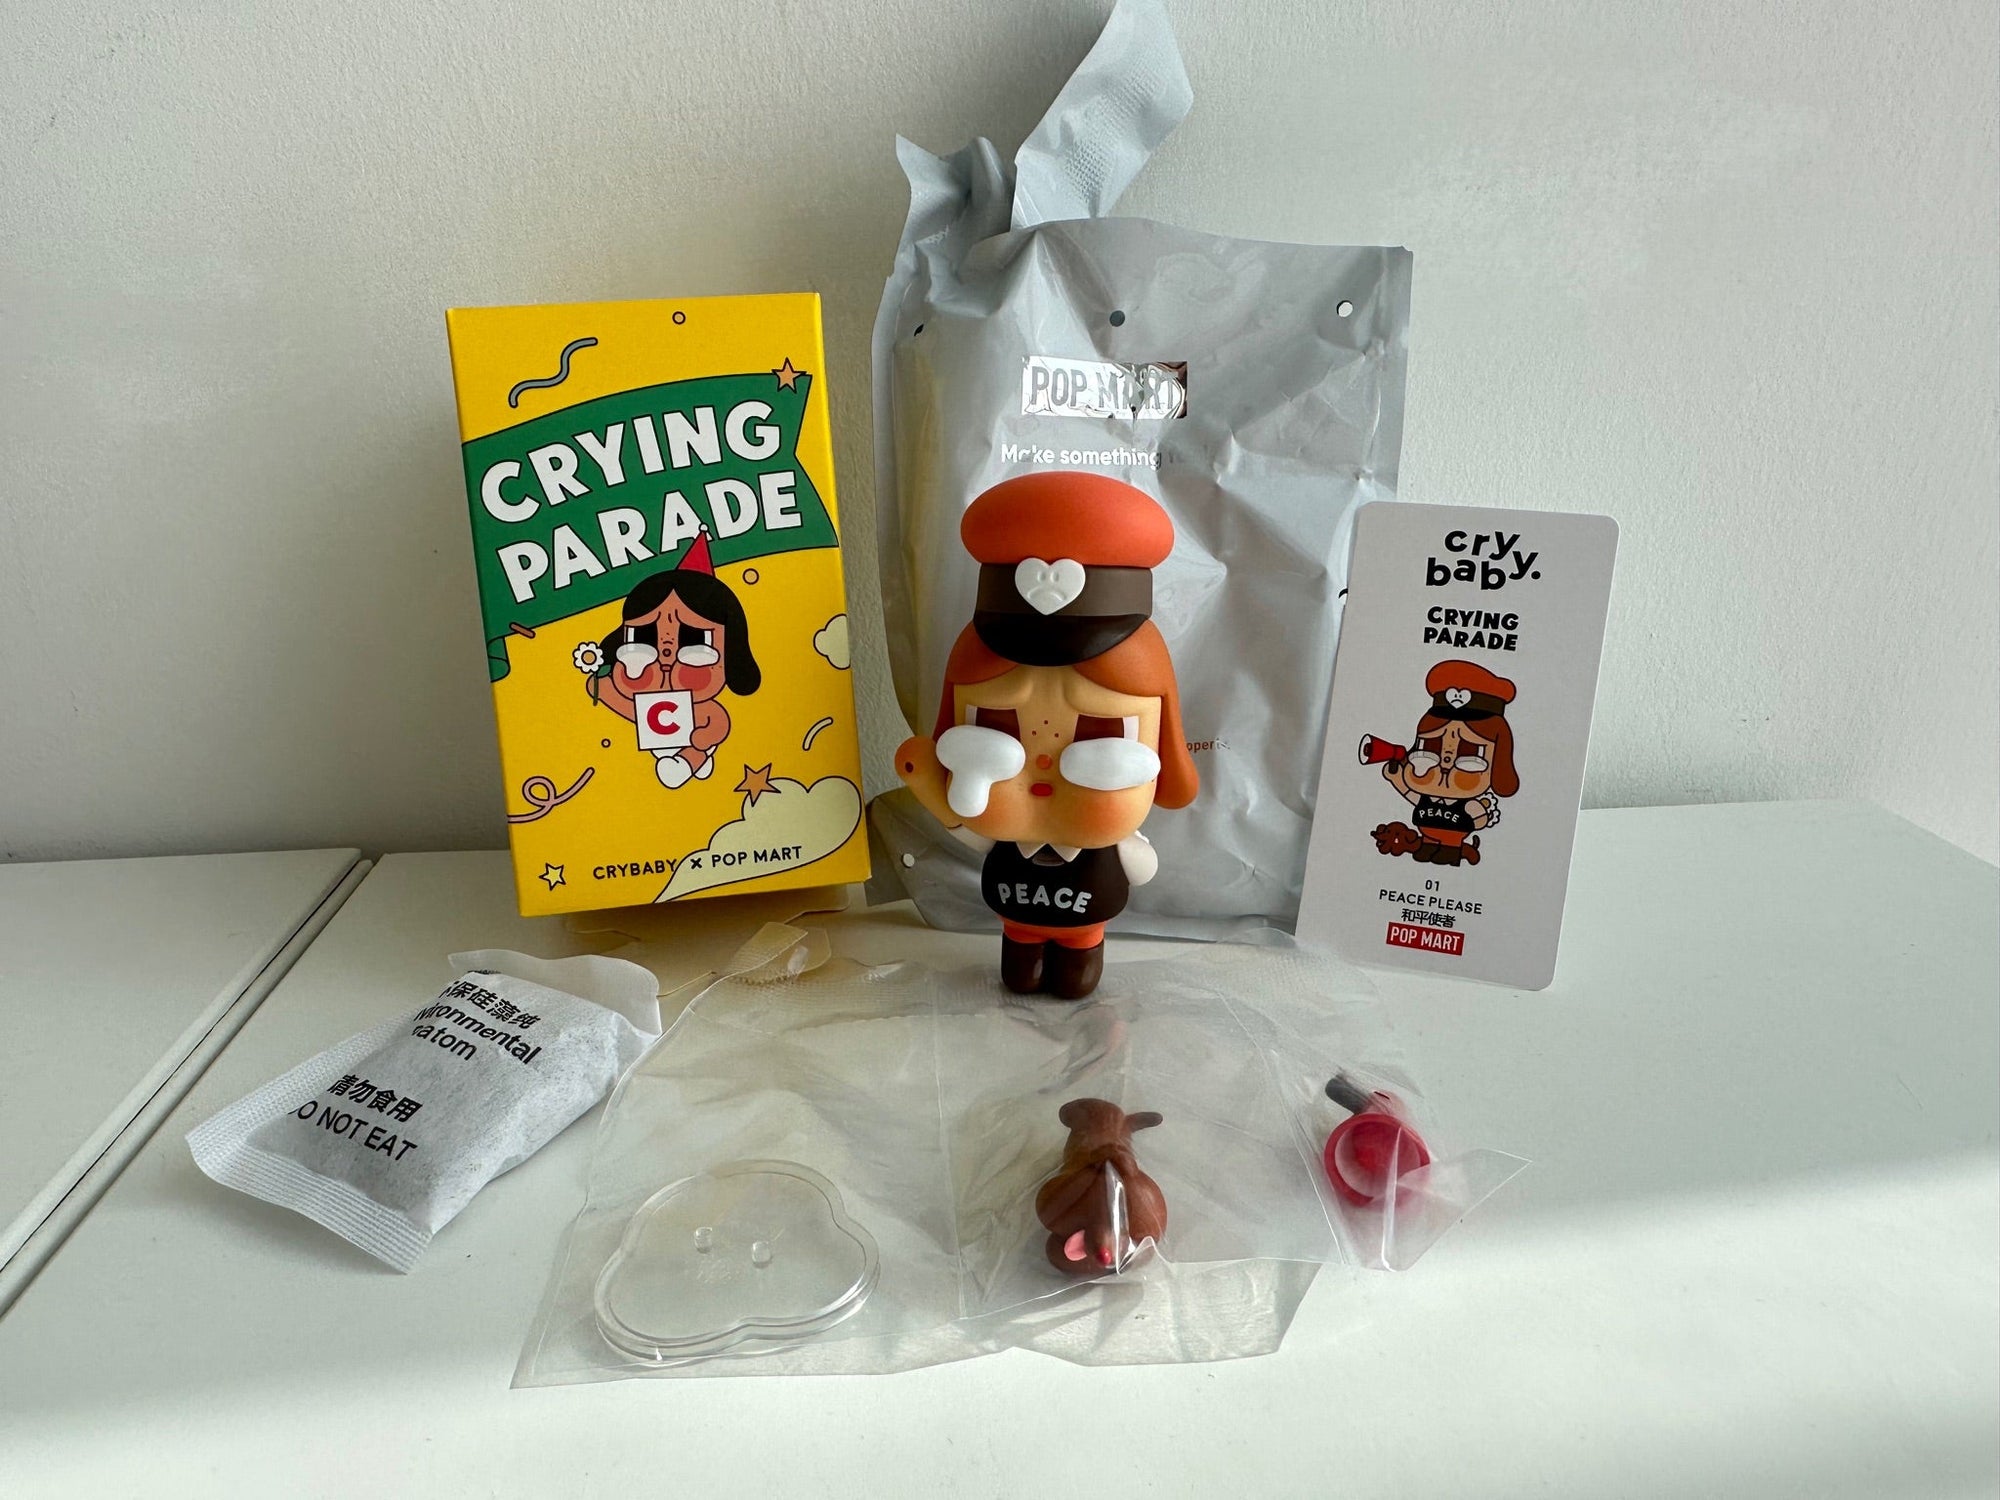 PEACE PLEASE - CRYBABY Crying Parade Series by POP MART - 1